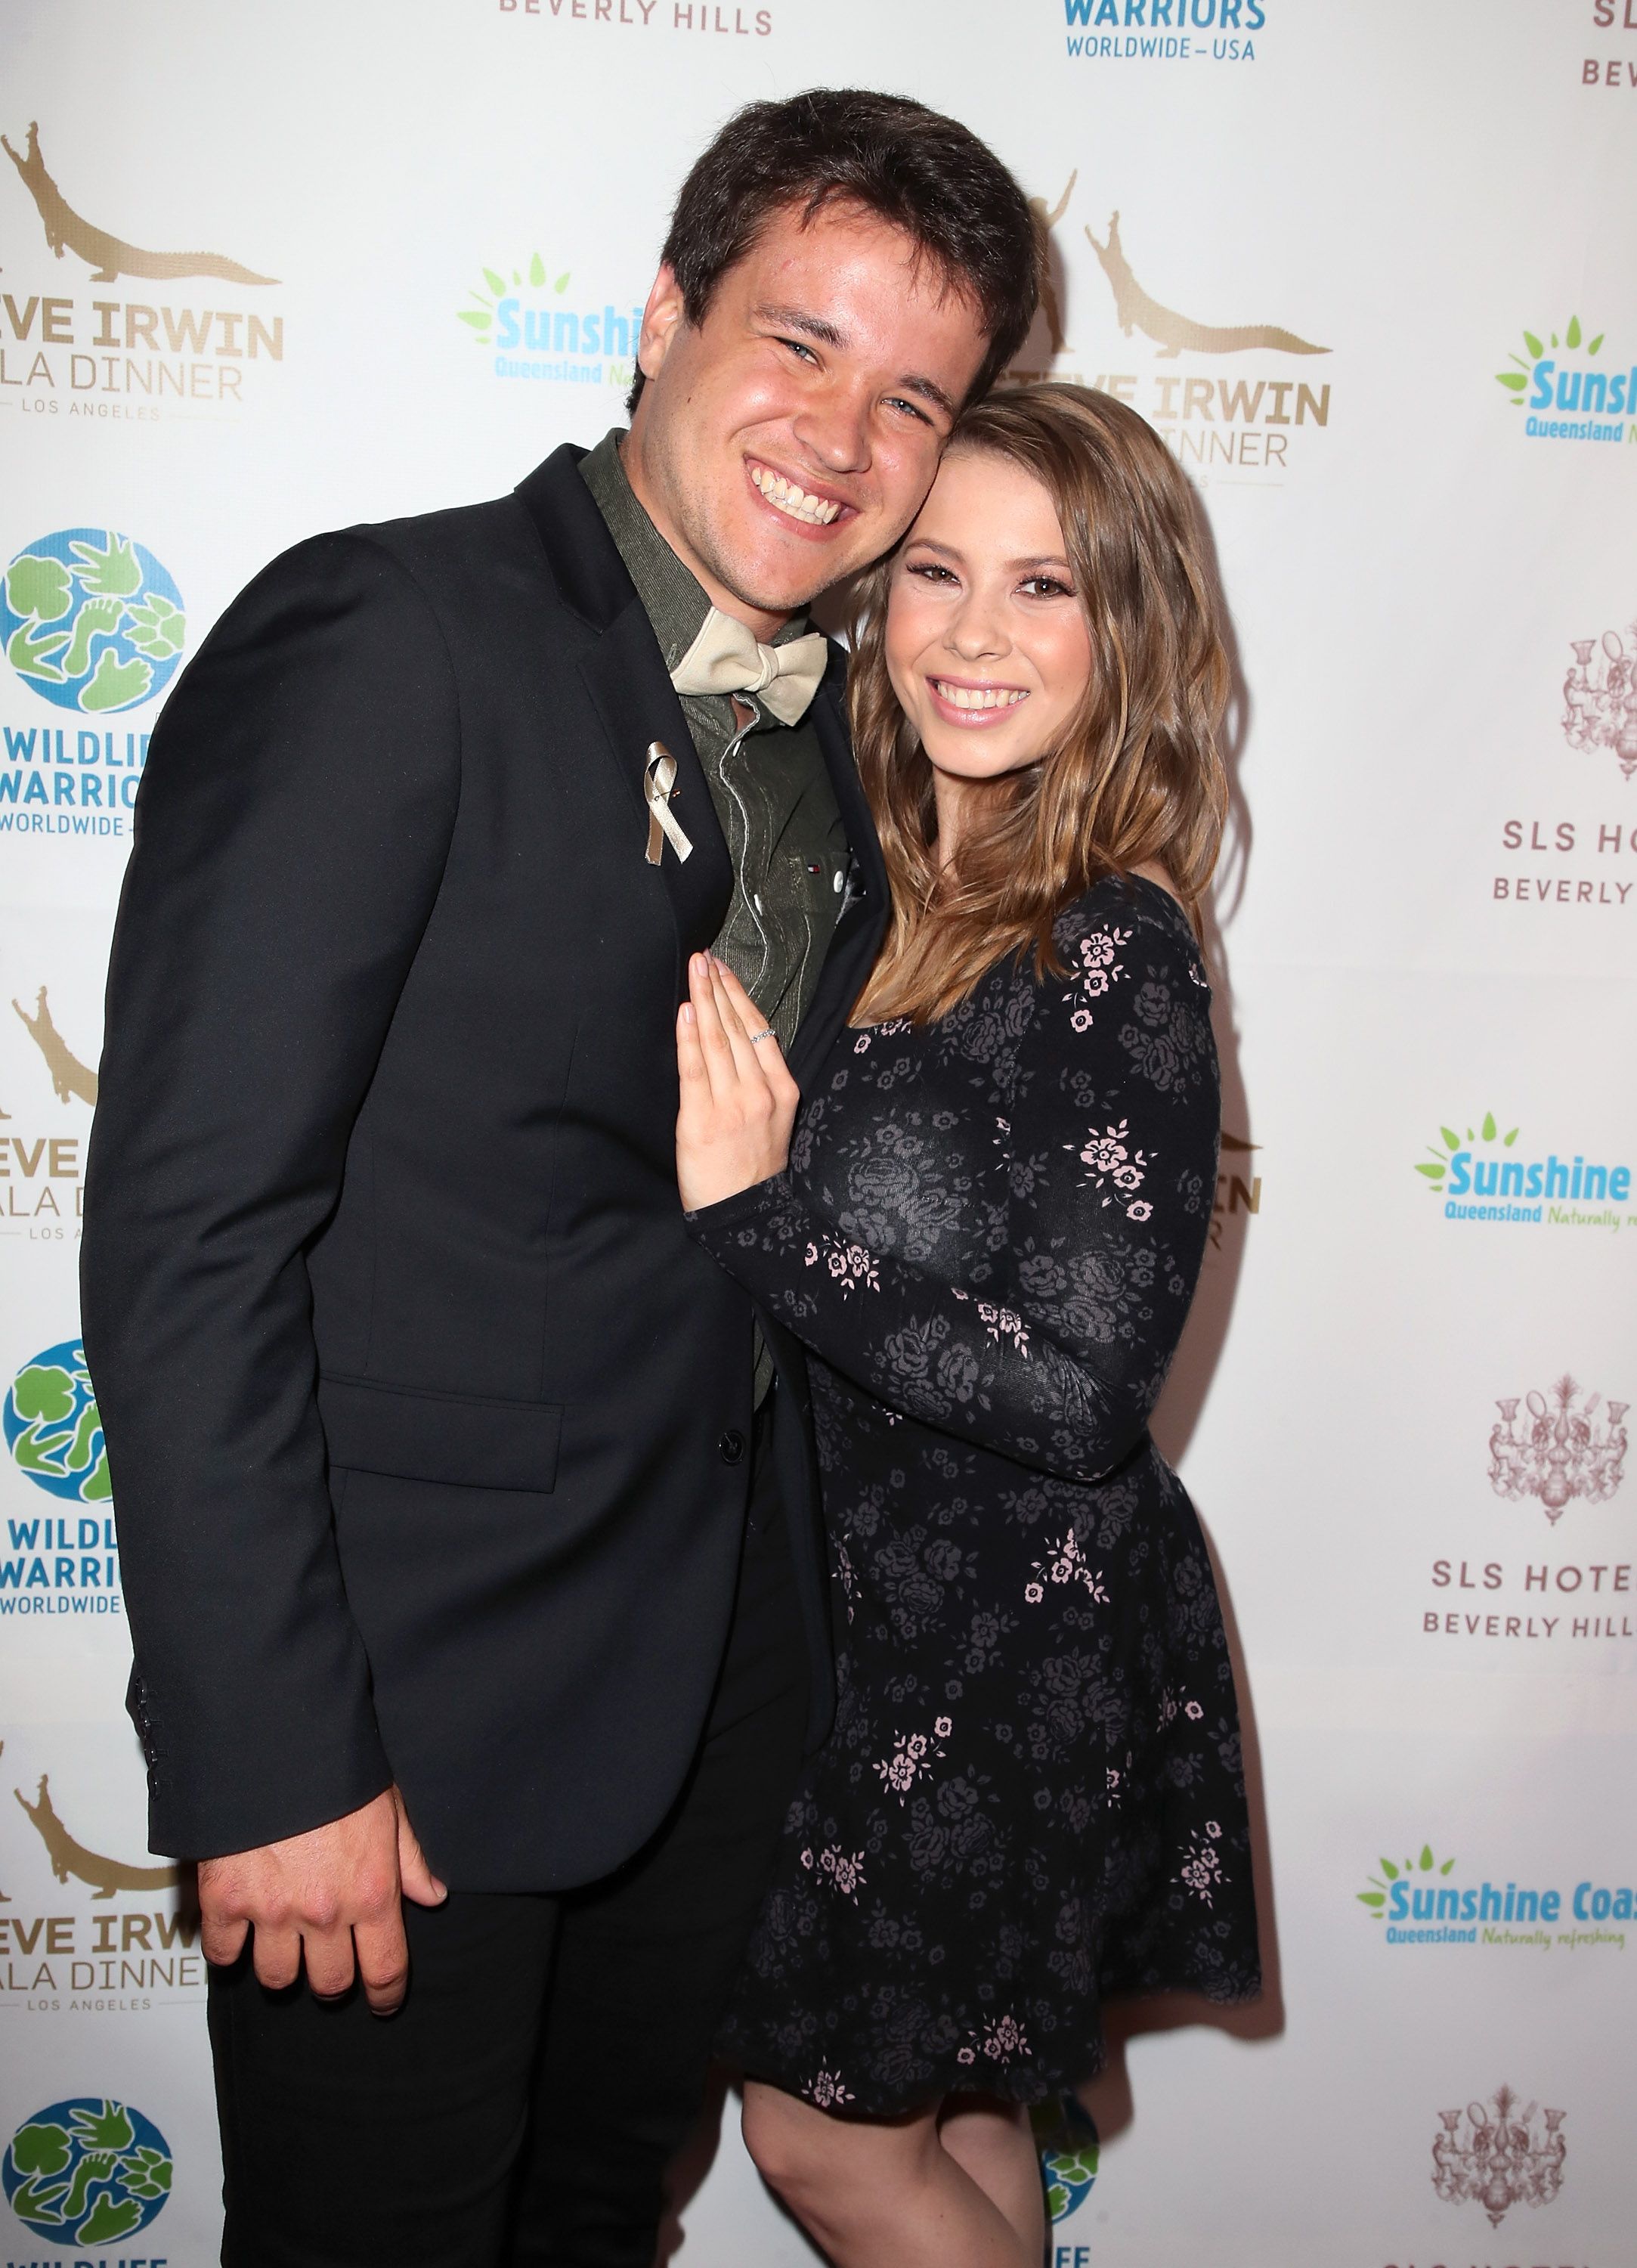 Chandler Powell and Bindi Irwin at the Steve Irwin Gala Dinner held at the SLS Hotel on May 5, 2018, in Beverly Hills, California | Photo: Getty Images